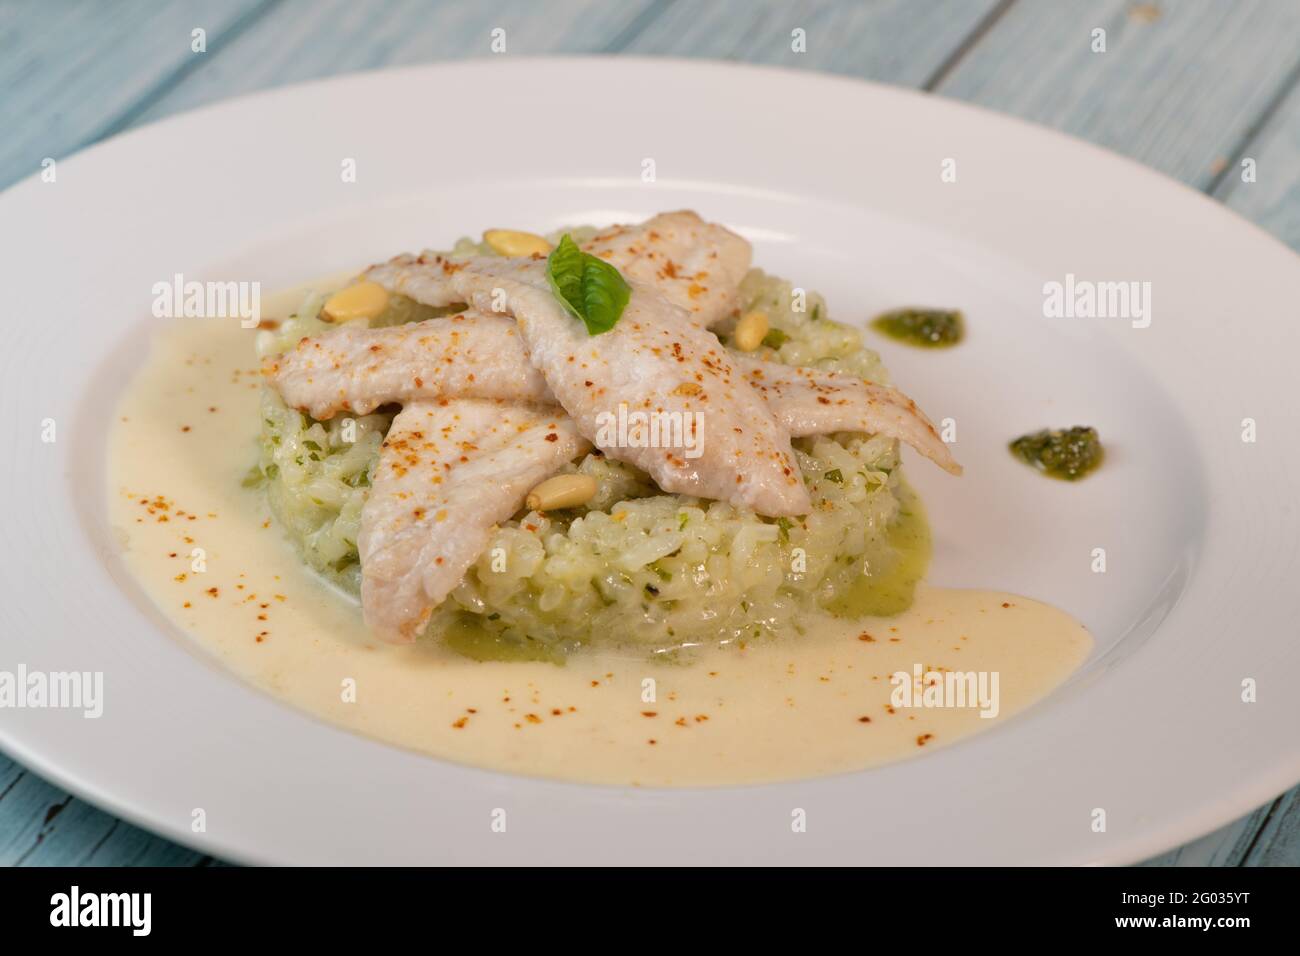 Baked sole fillet, risotto and pesto recipe Stock Photo